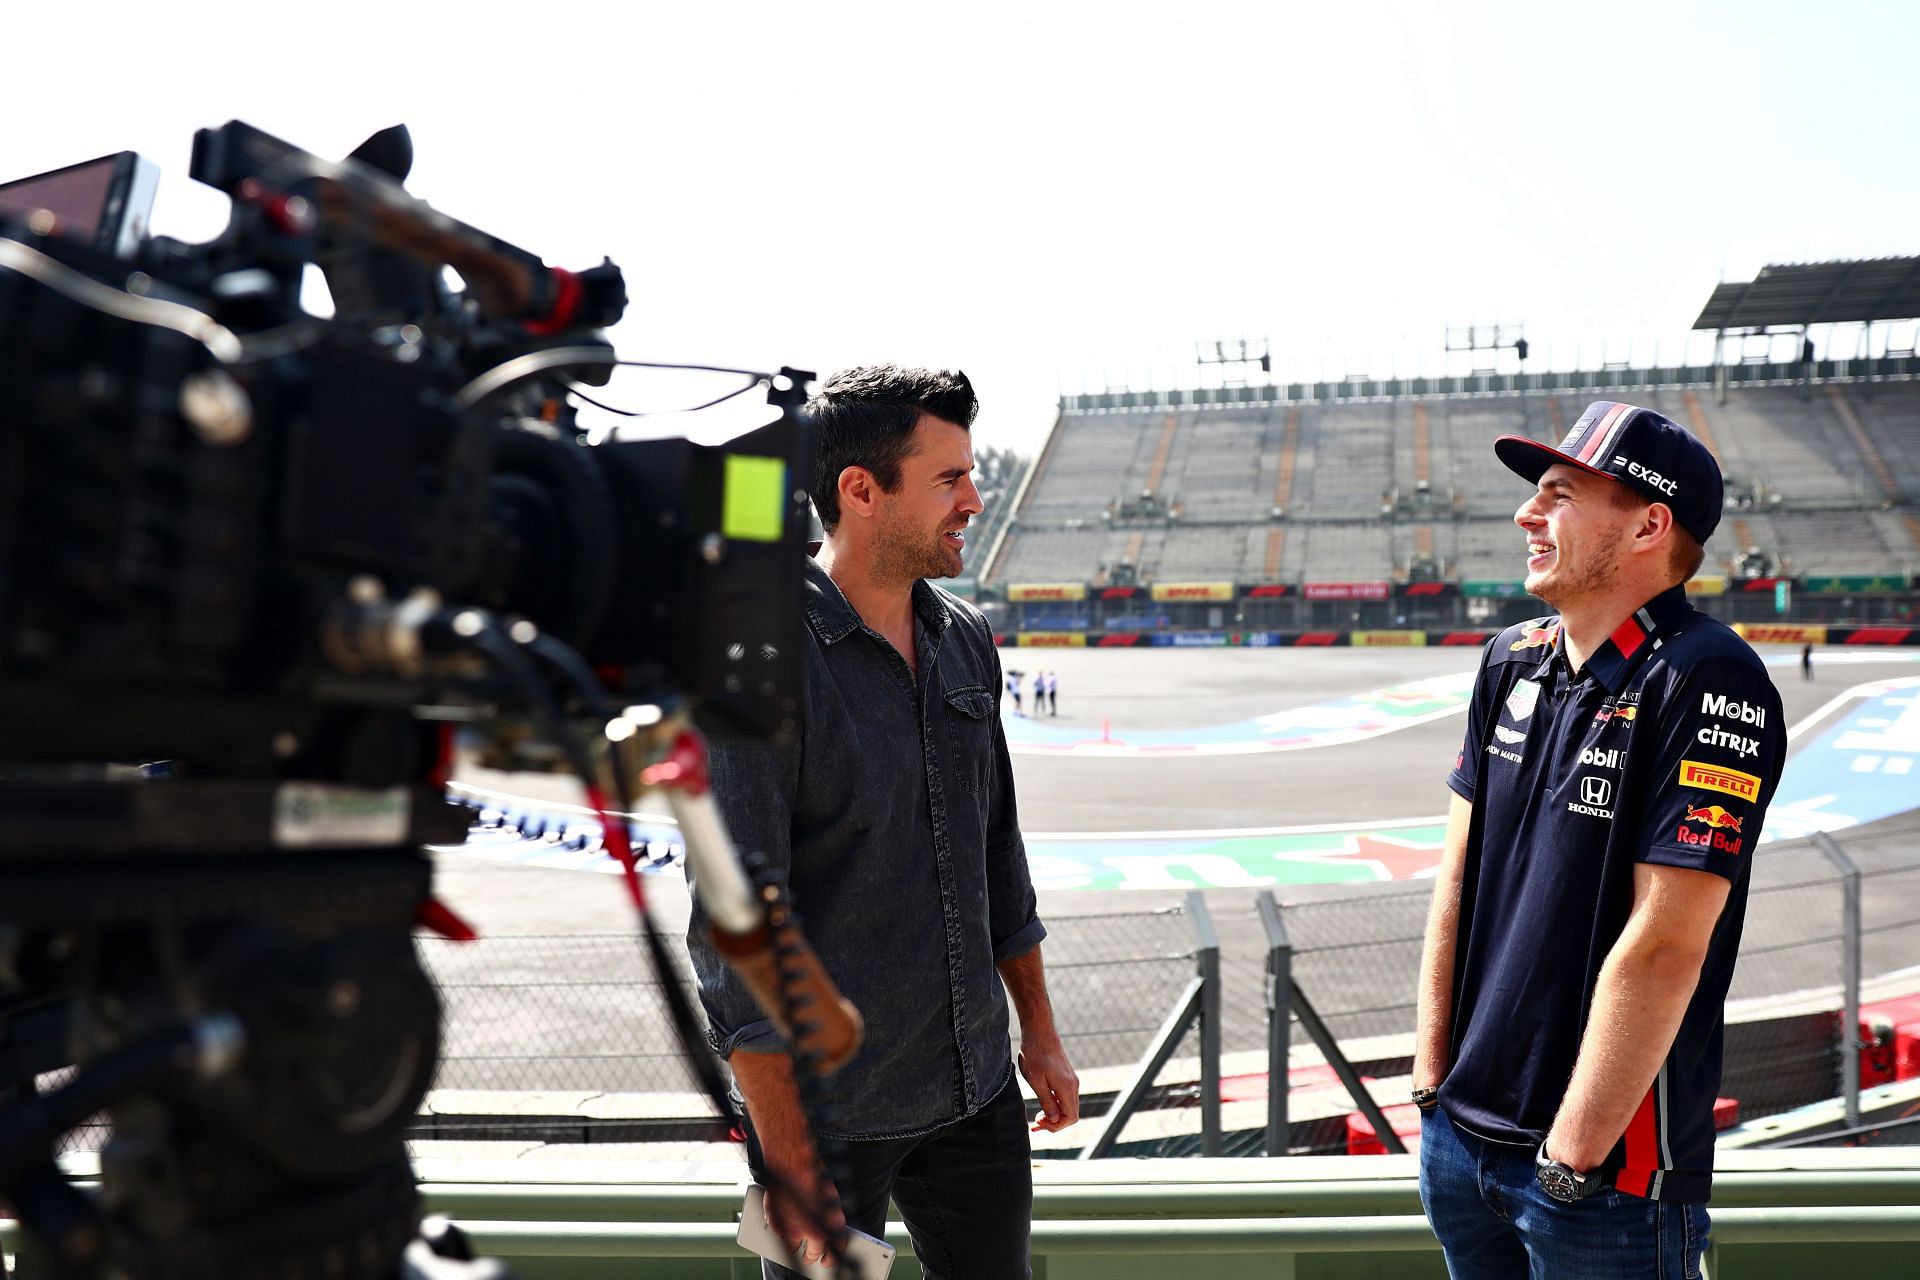 F1 Grand Prix of Mexico - Max Verstappen being interviewed by Steve Jones of Channel 4